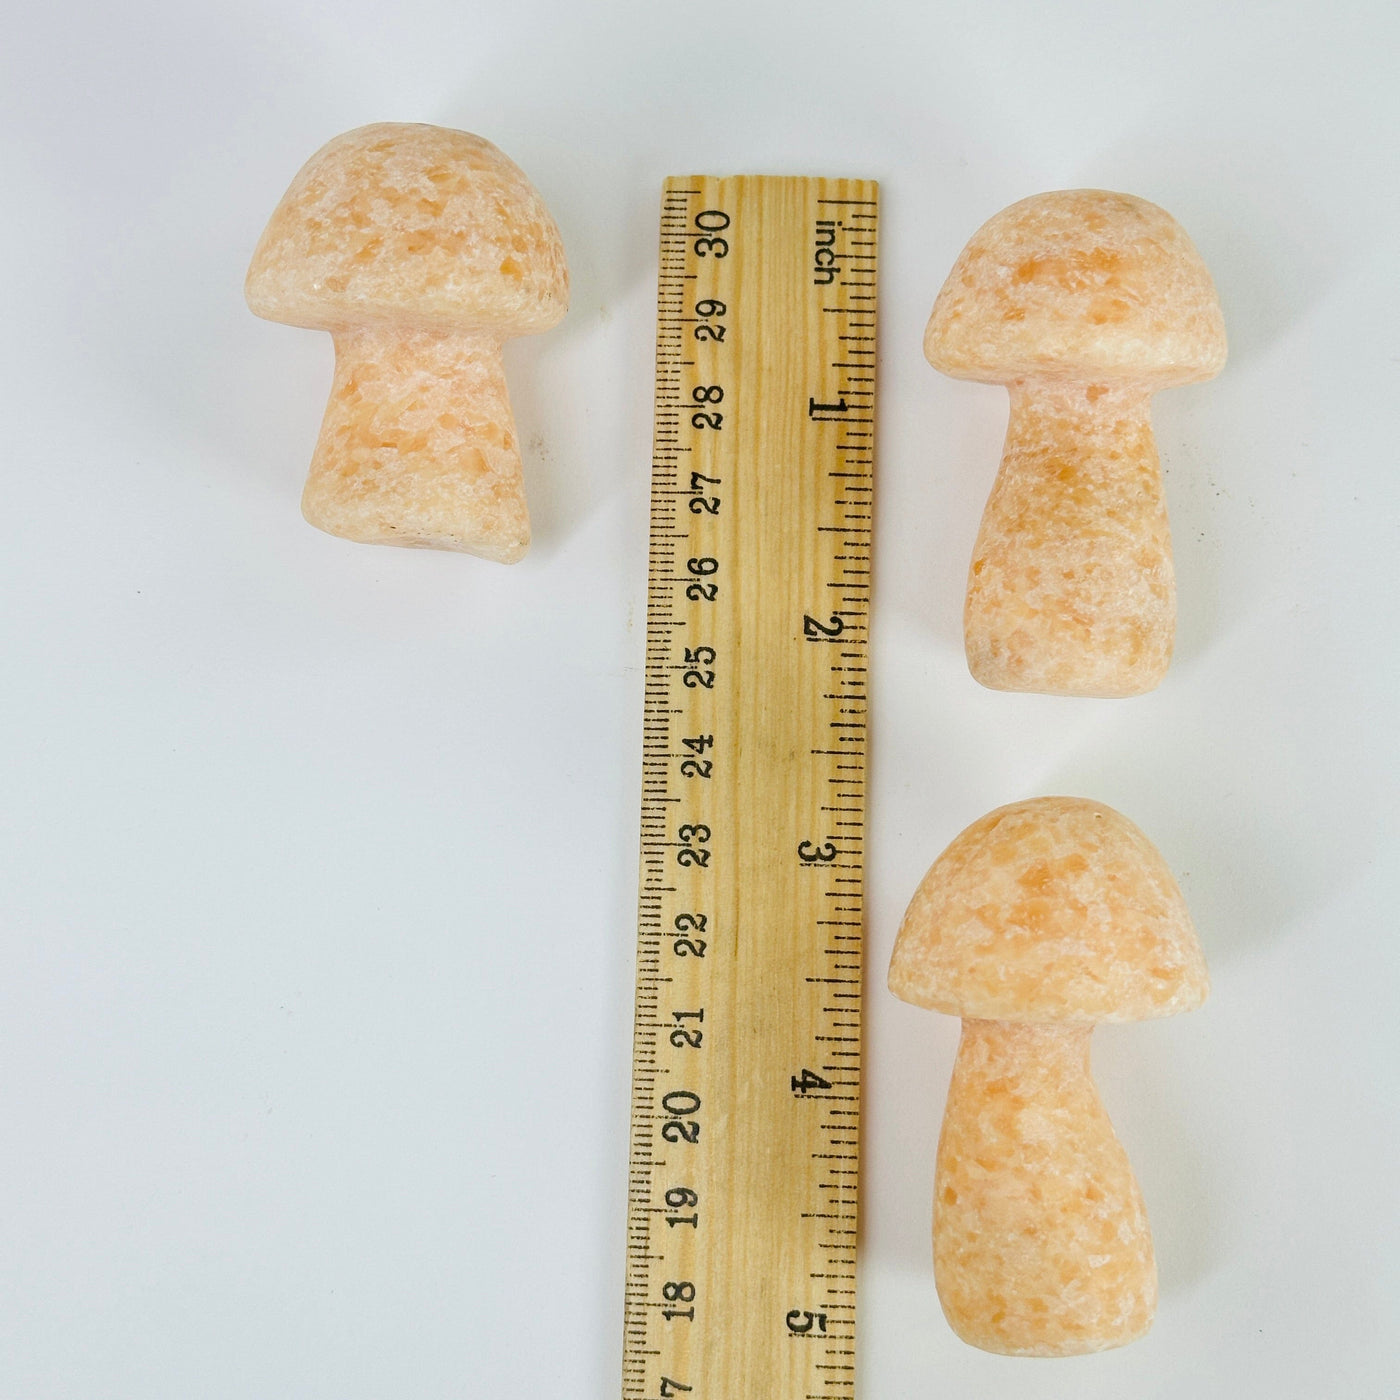 peach calcite mushroom next to a ruler for size reference